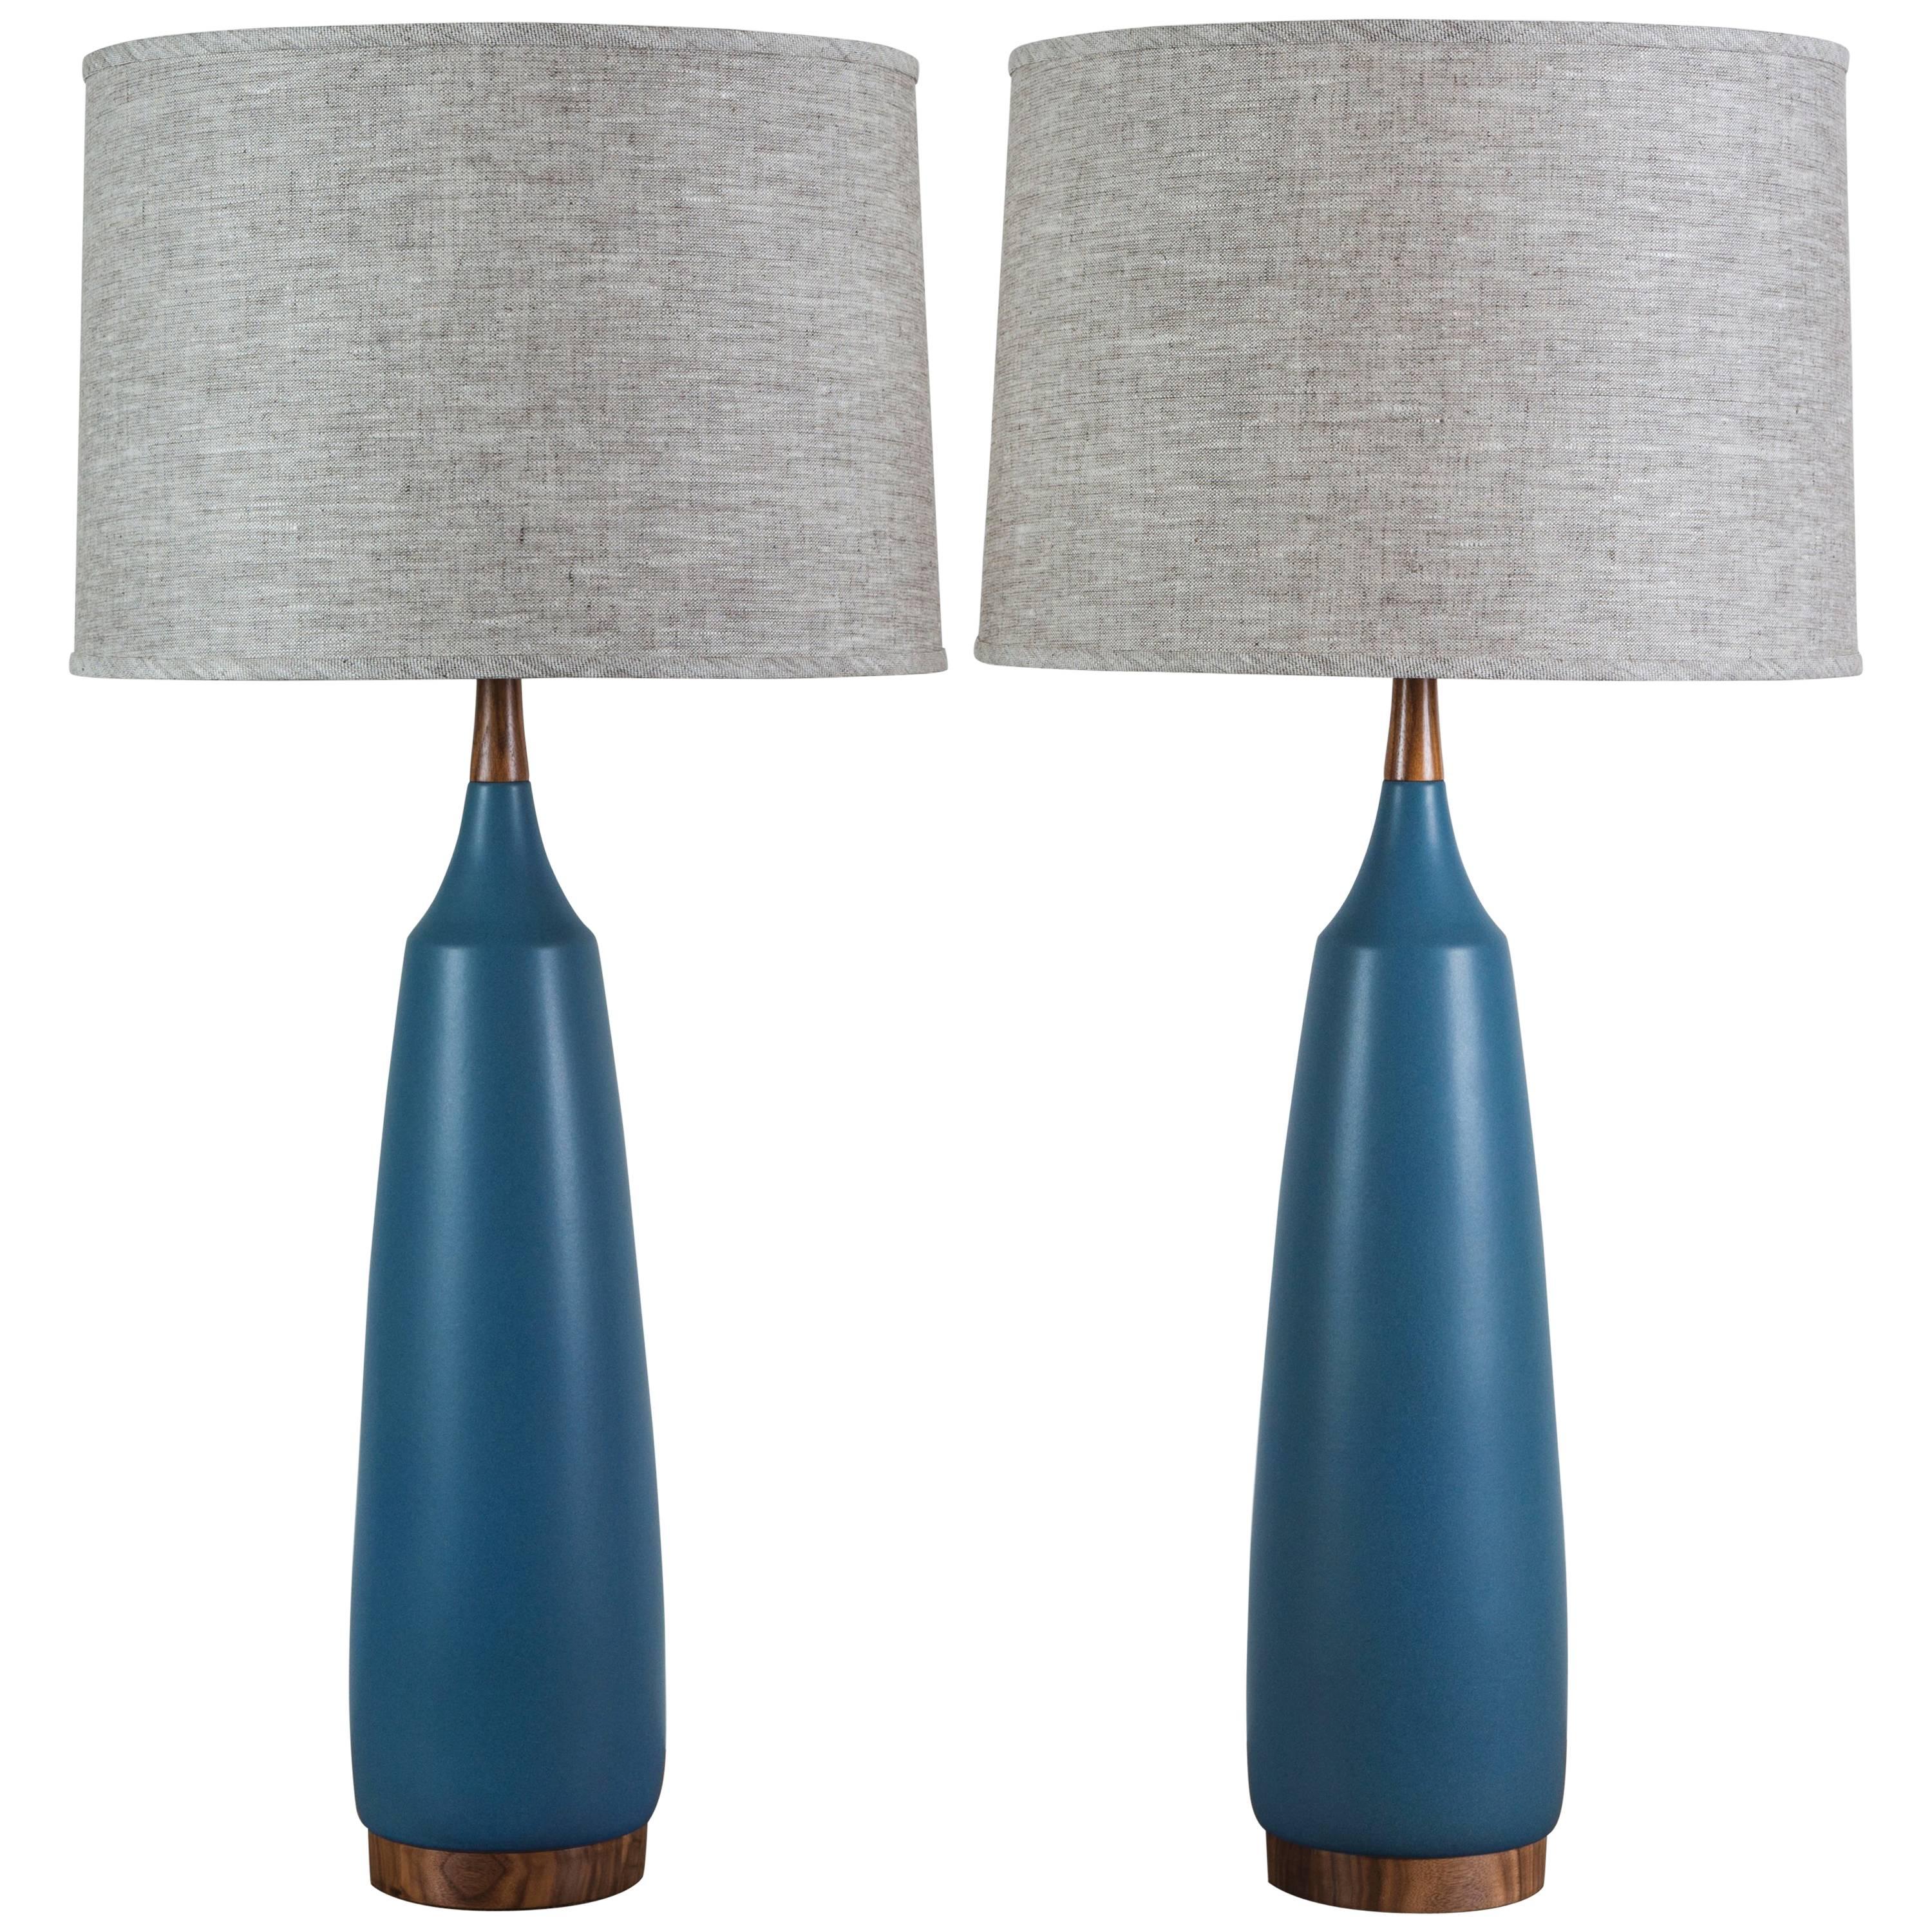 Pair of Laurel Lamps by Stone and Sawyer for Lawson-Fenning